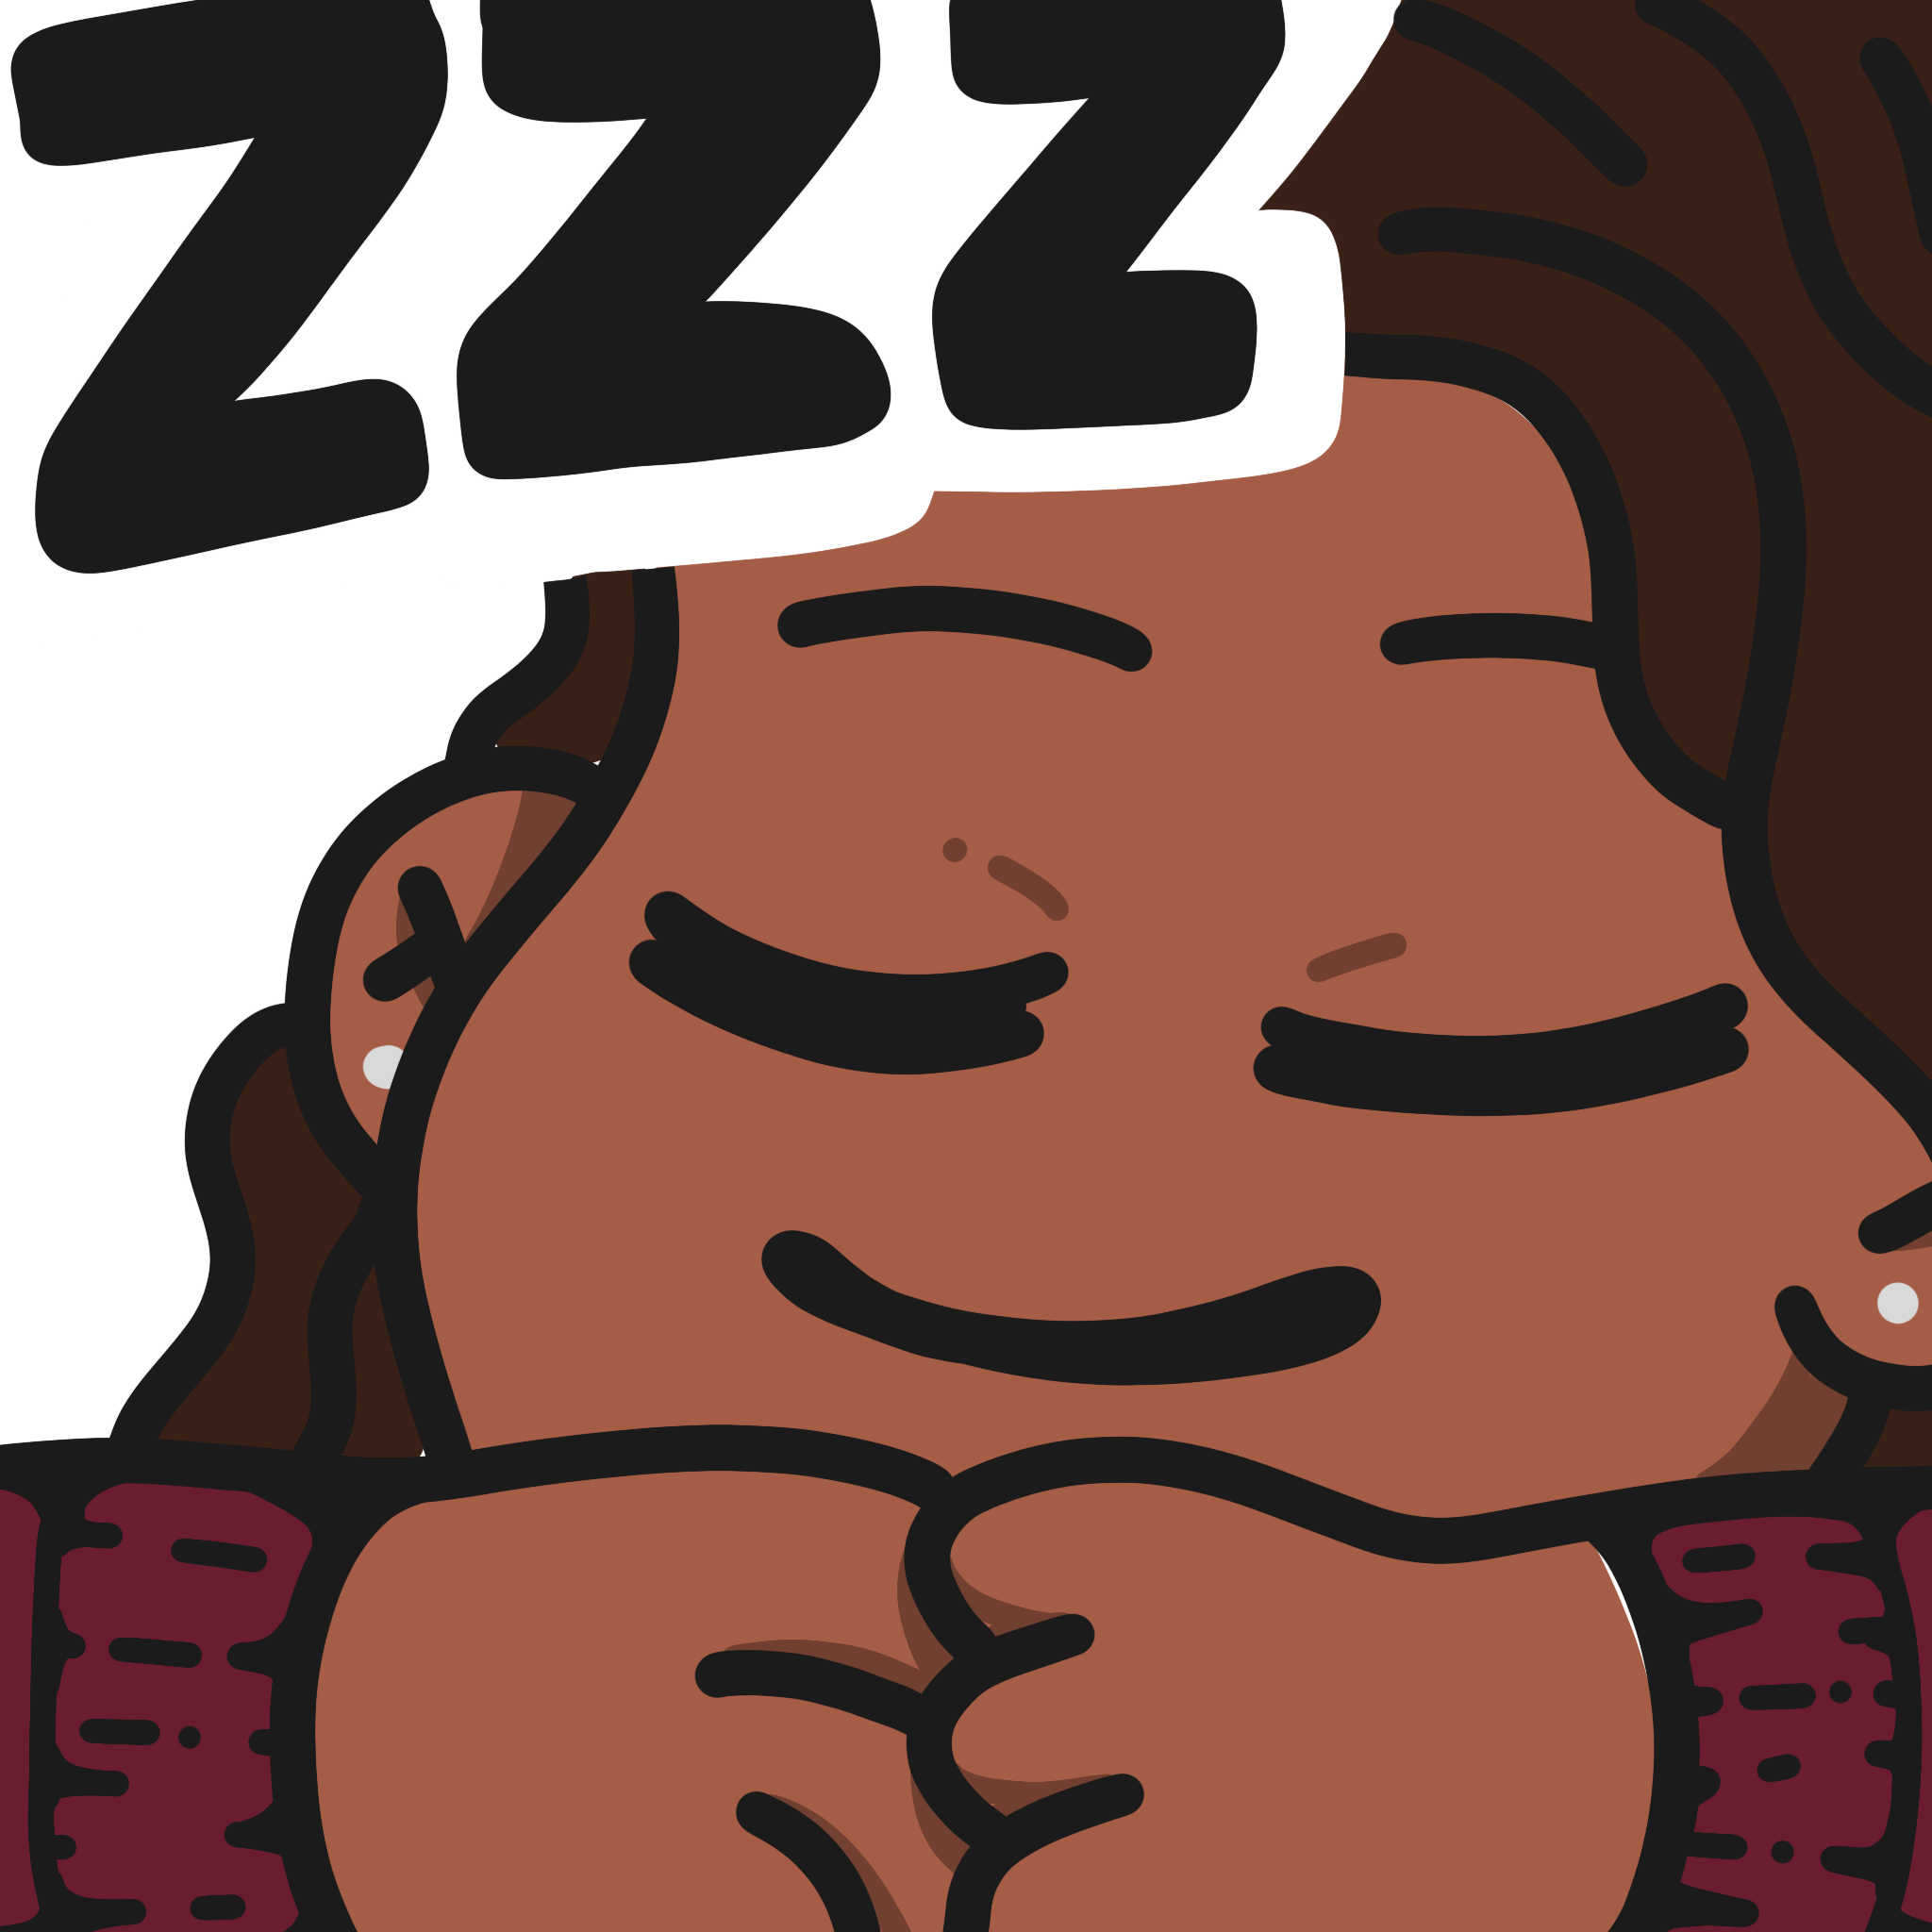 zzz_2048.png